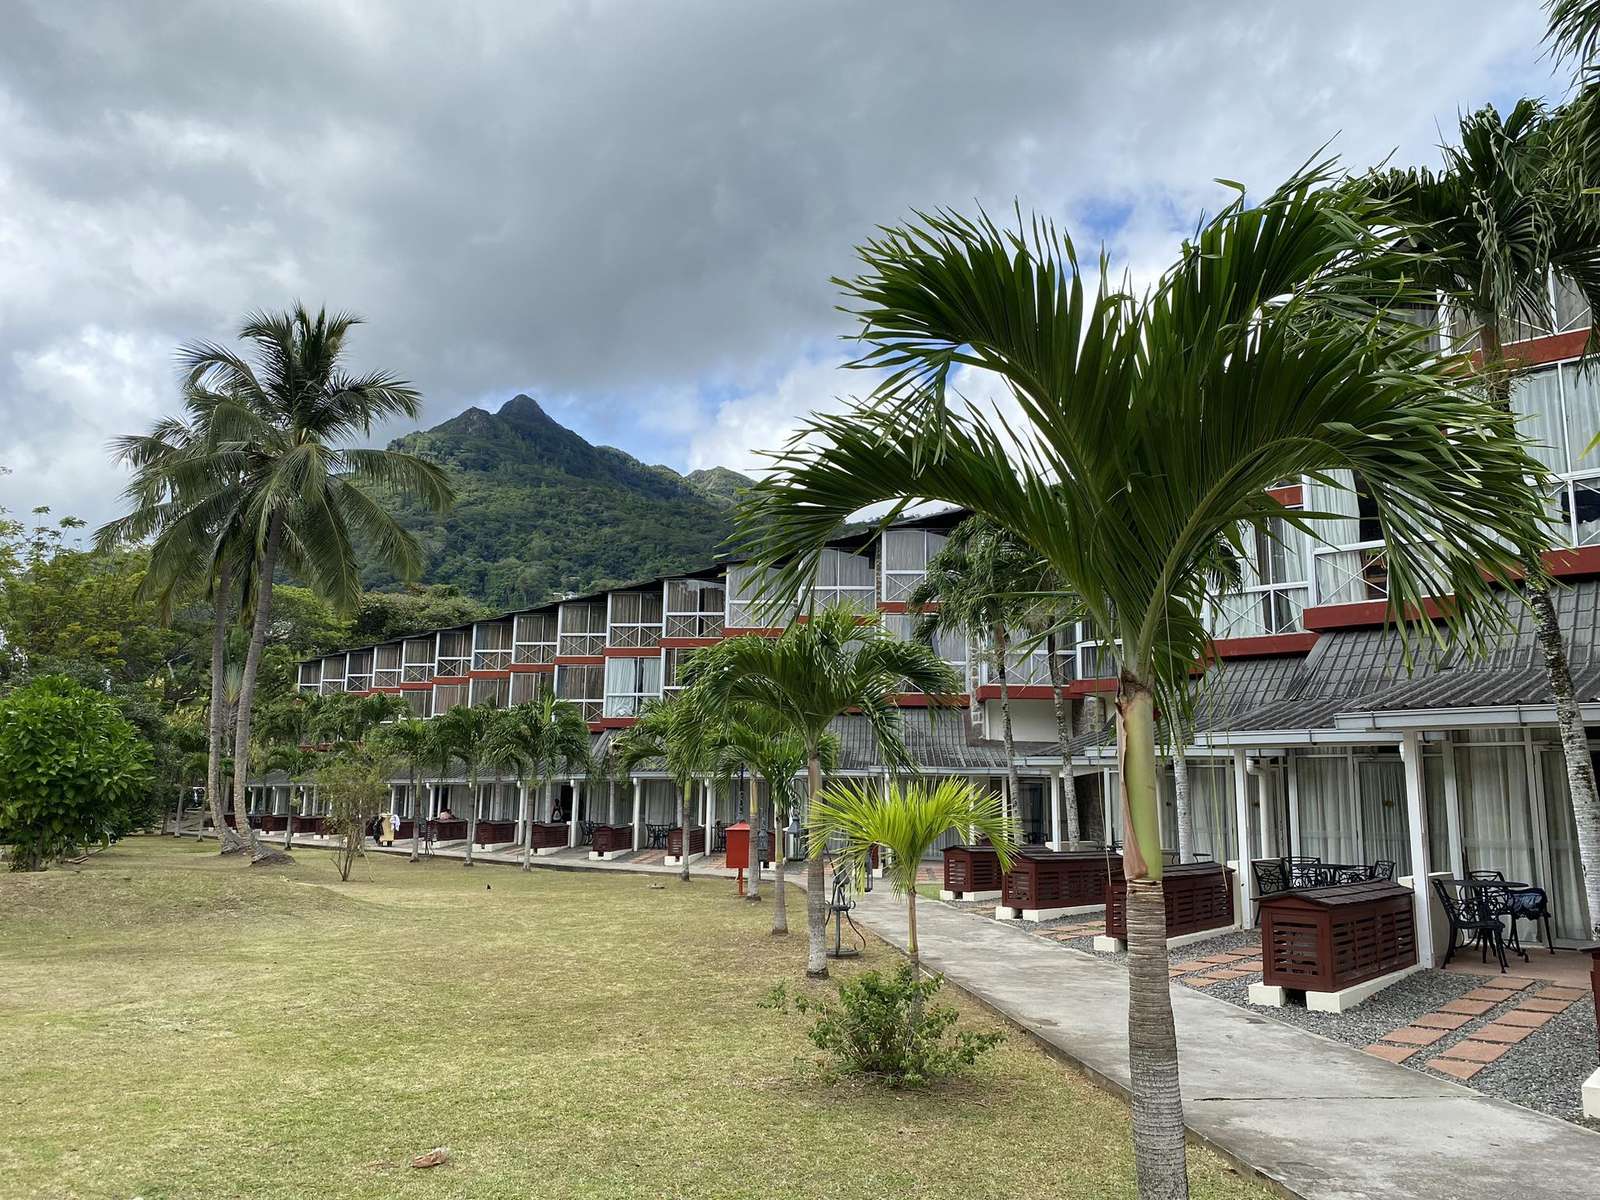 Hotel on the island of Mahe'- Seychelles online puzzle